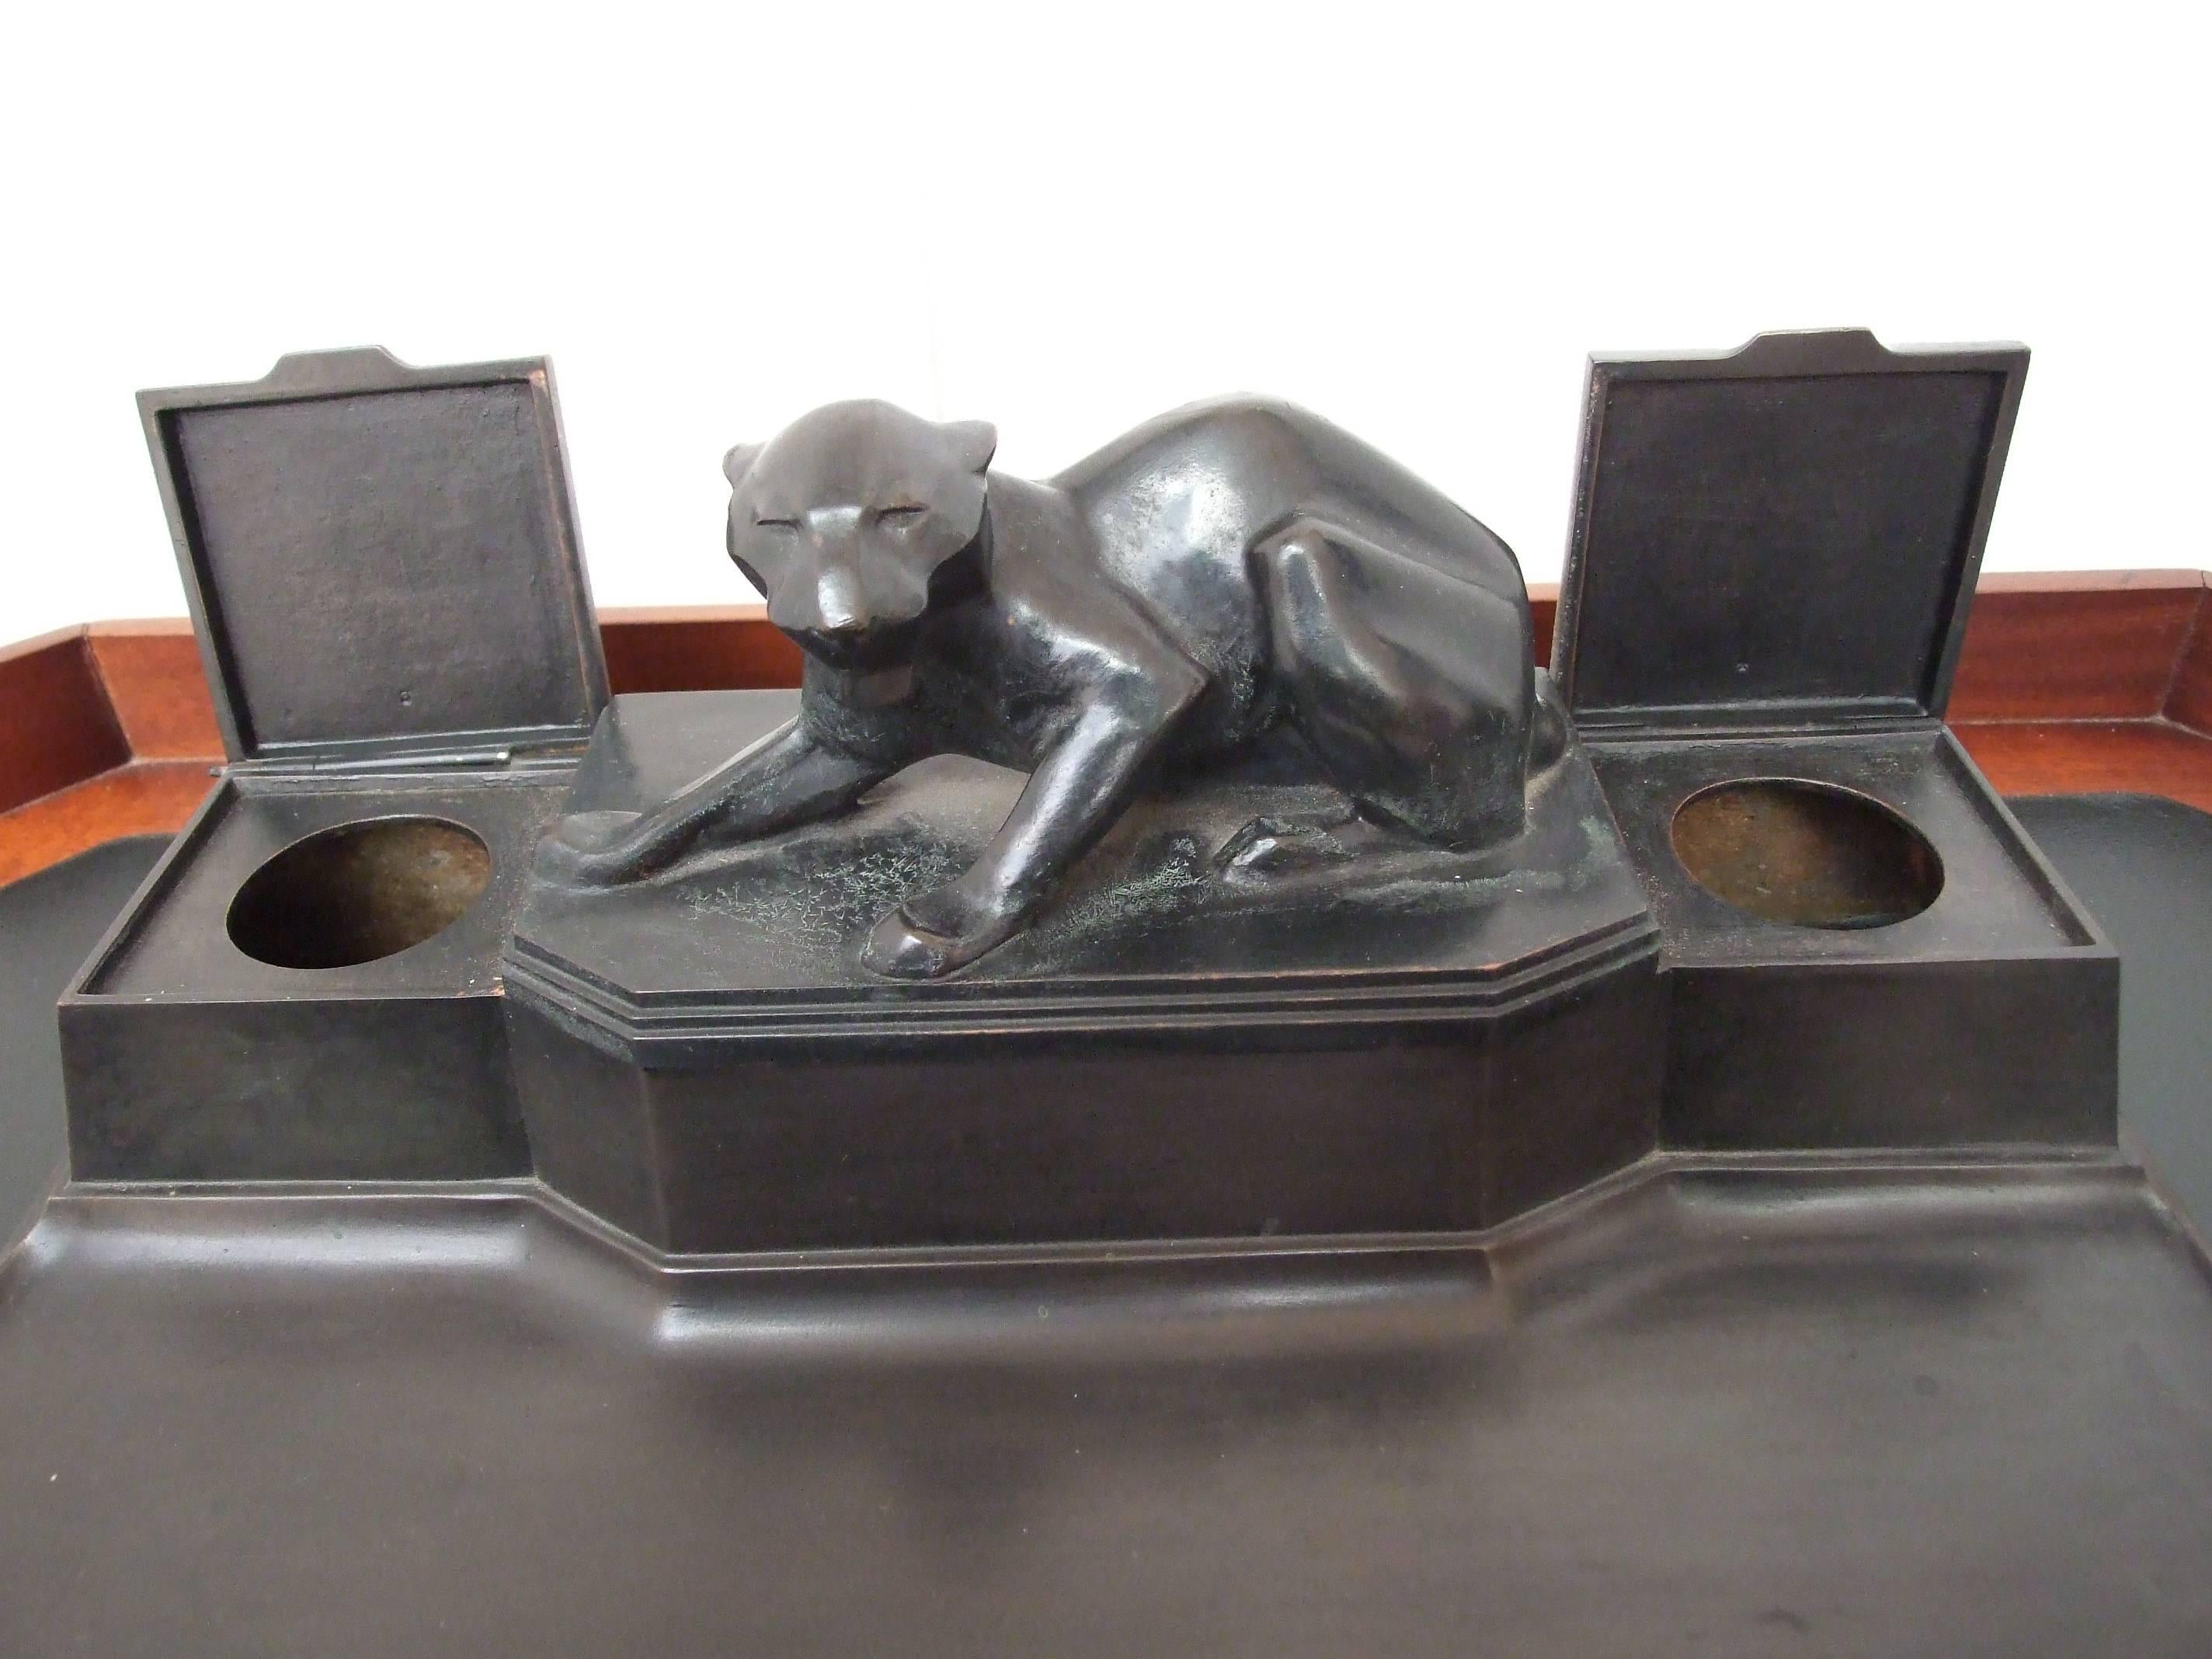 A bronze double inkwell with integral pen tray surmounted by a sculpture of a tiger, signed by A Puchegger circa 1910, measure: 14cm (5.5in) high, 34.25cm (13.5in) wide, 18cm (7in) deep. Anton Puchegger, Austrian School, born at Payerbach, circa